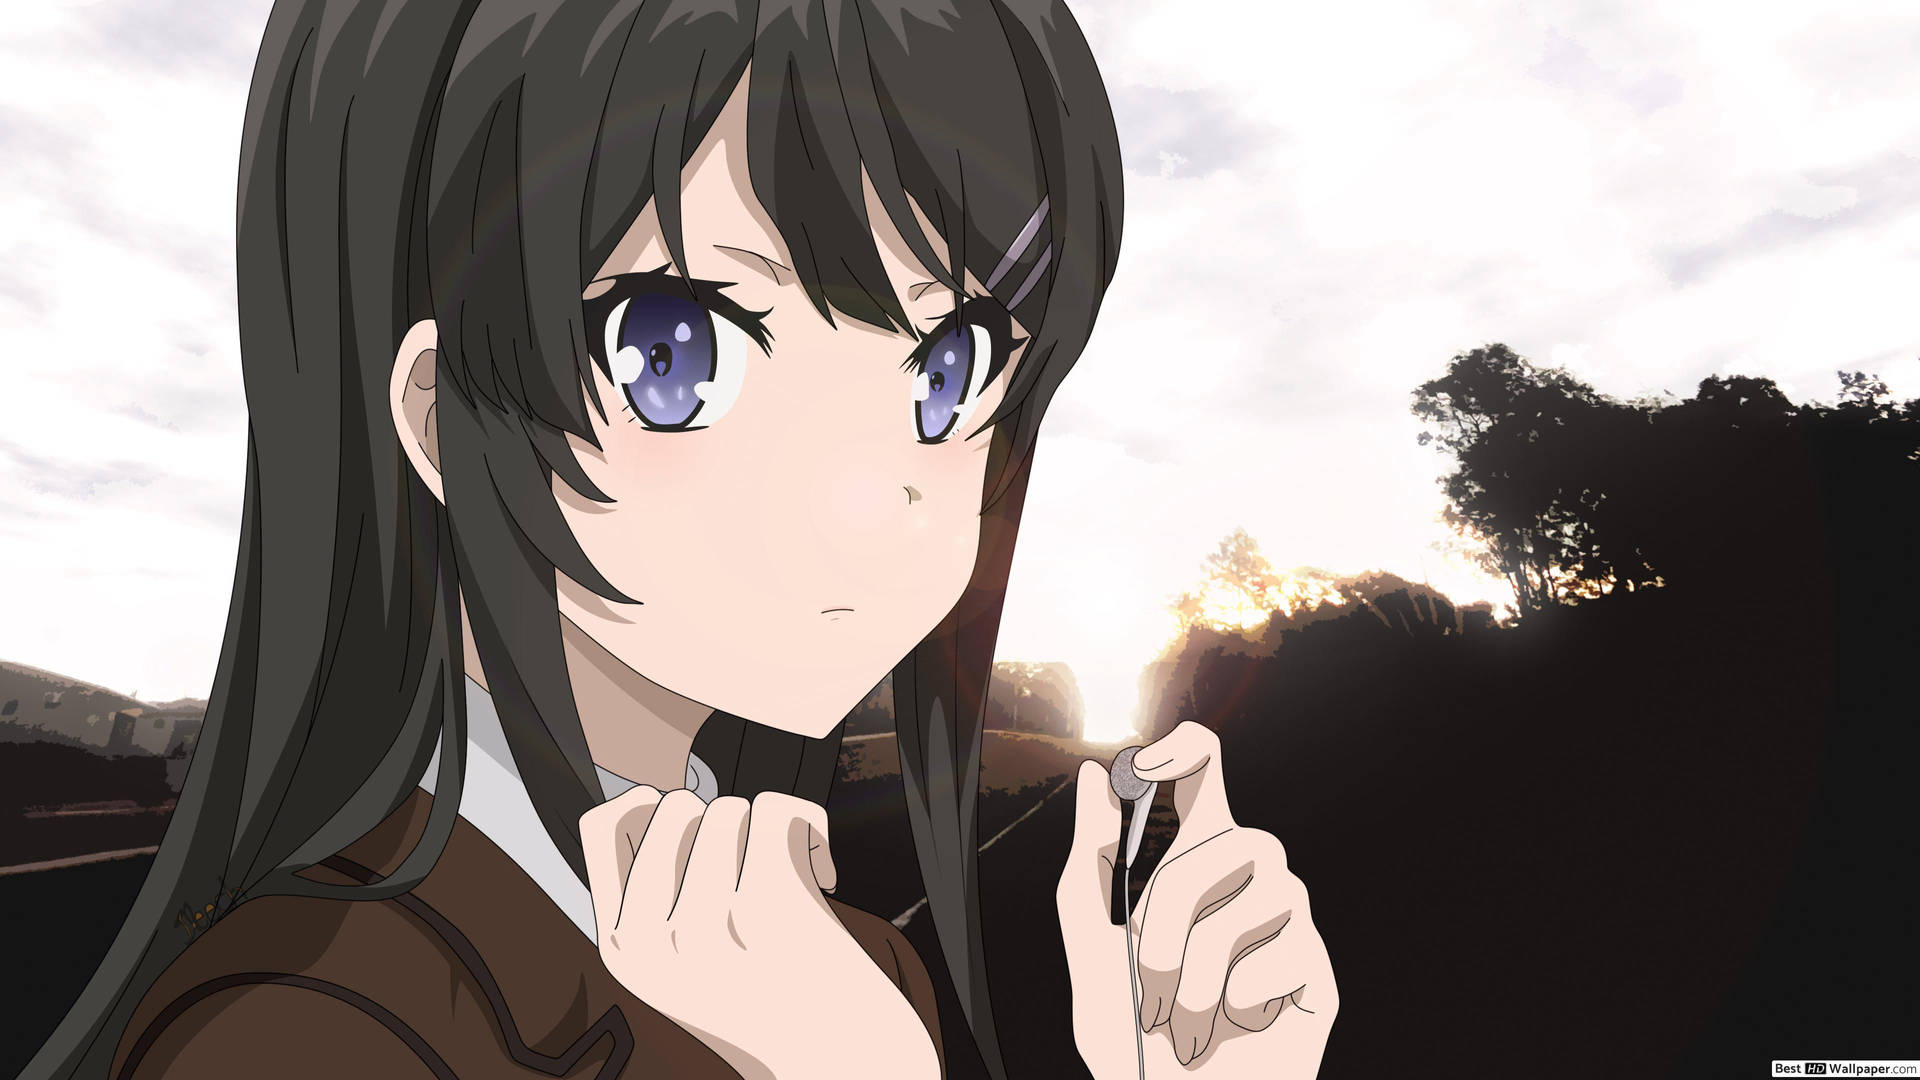 "The Charismatic Bunny Girl from Rascal Does Not Dream Of Bunny Girl Senpai." Wallpaper